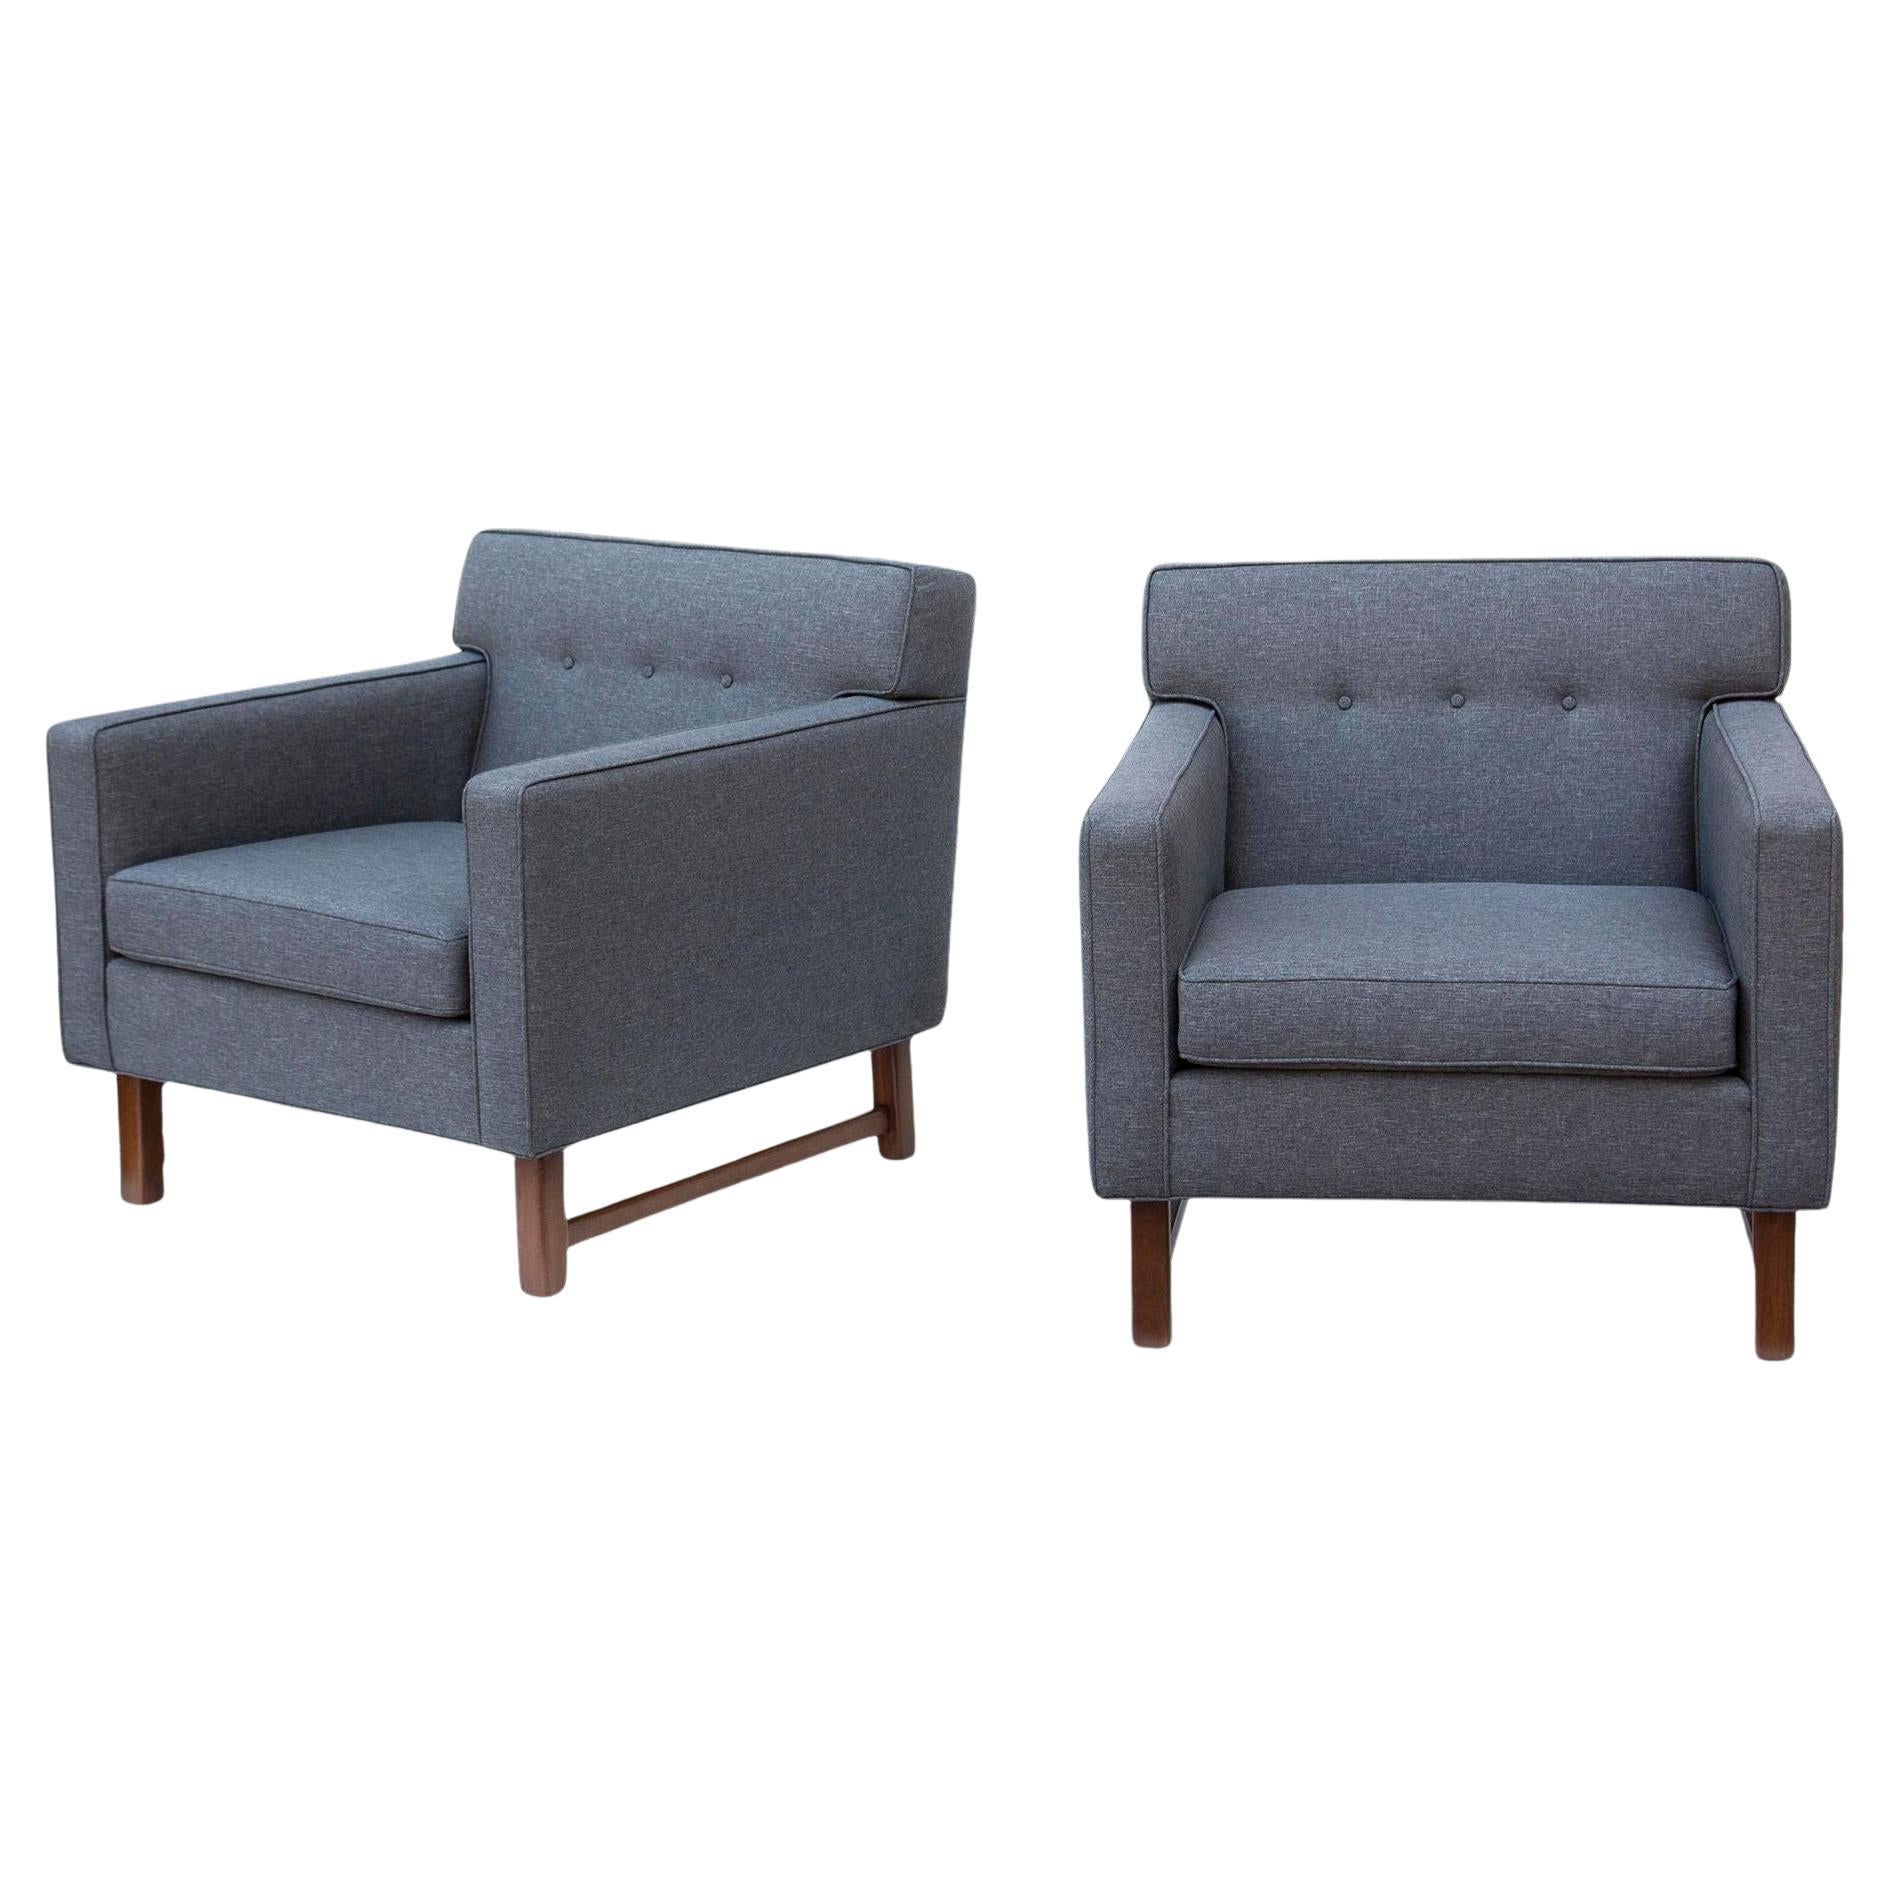 Tufted Midcentury Armchairs in the Style of Dunbar, a Pair For Sale